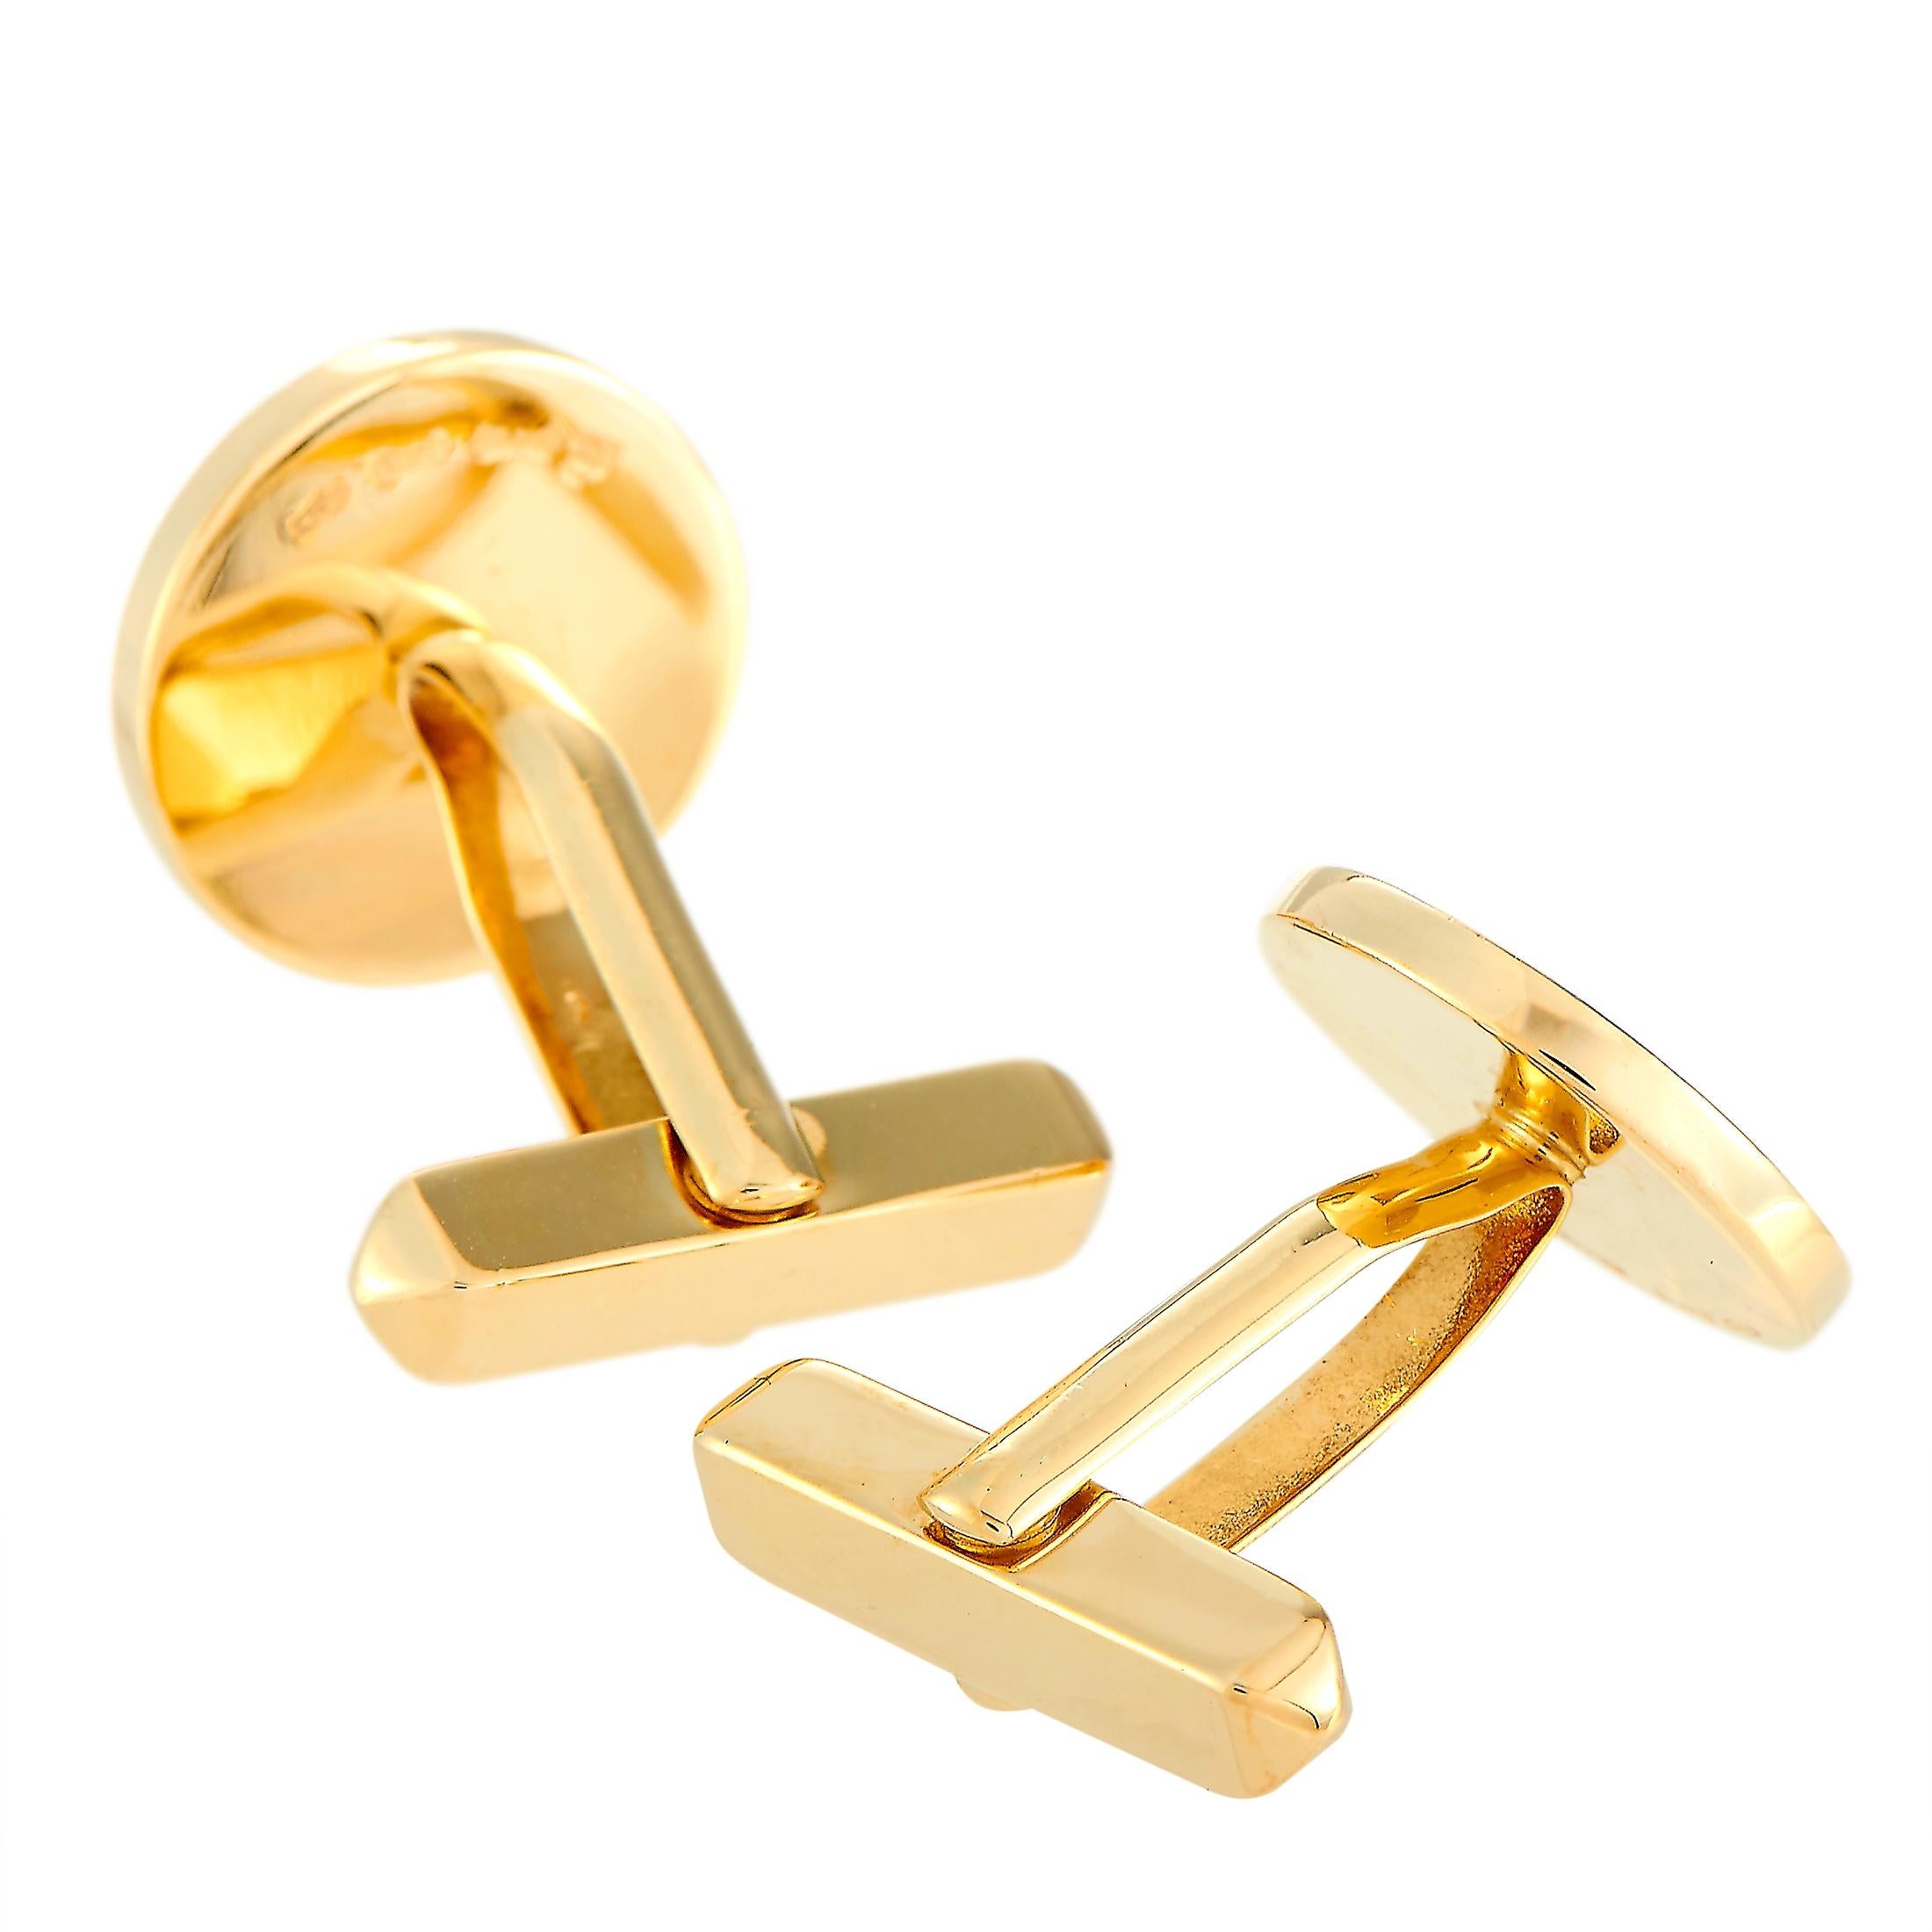 The Bvlgari “Bvlgari Bvlgari” cufflinks are made out of 18K yellow gold and onyx and each of the two weighs 6.2 grams. The cufflinks measure 0.65” in length and 0.65” in width.